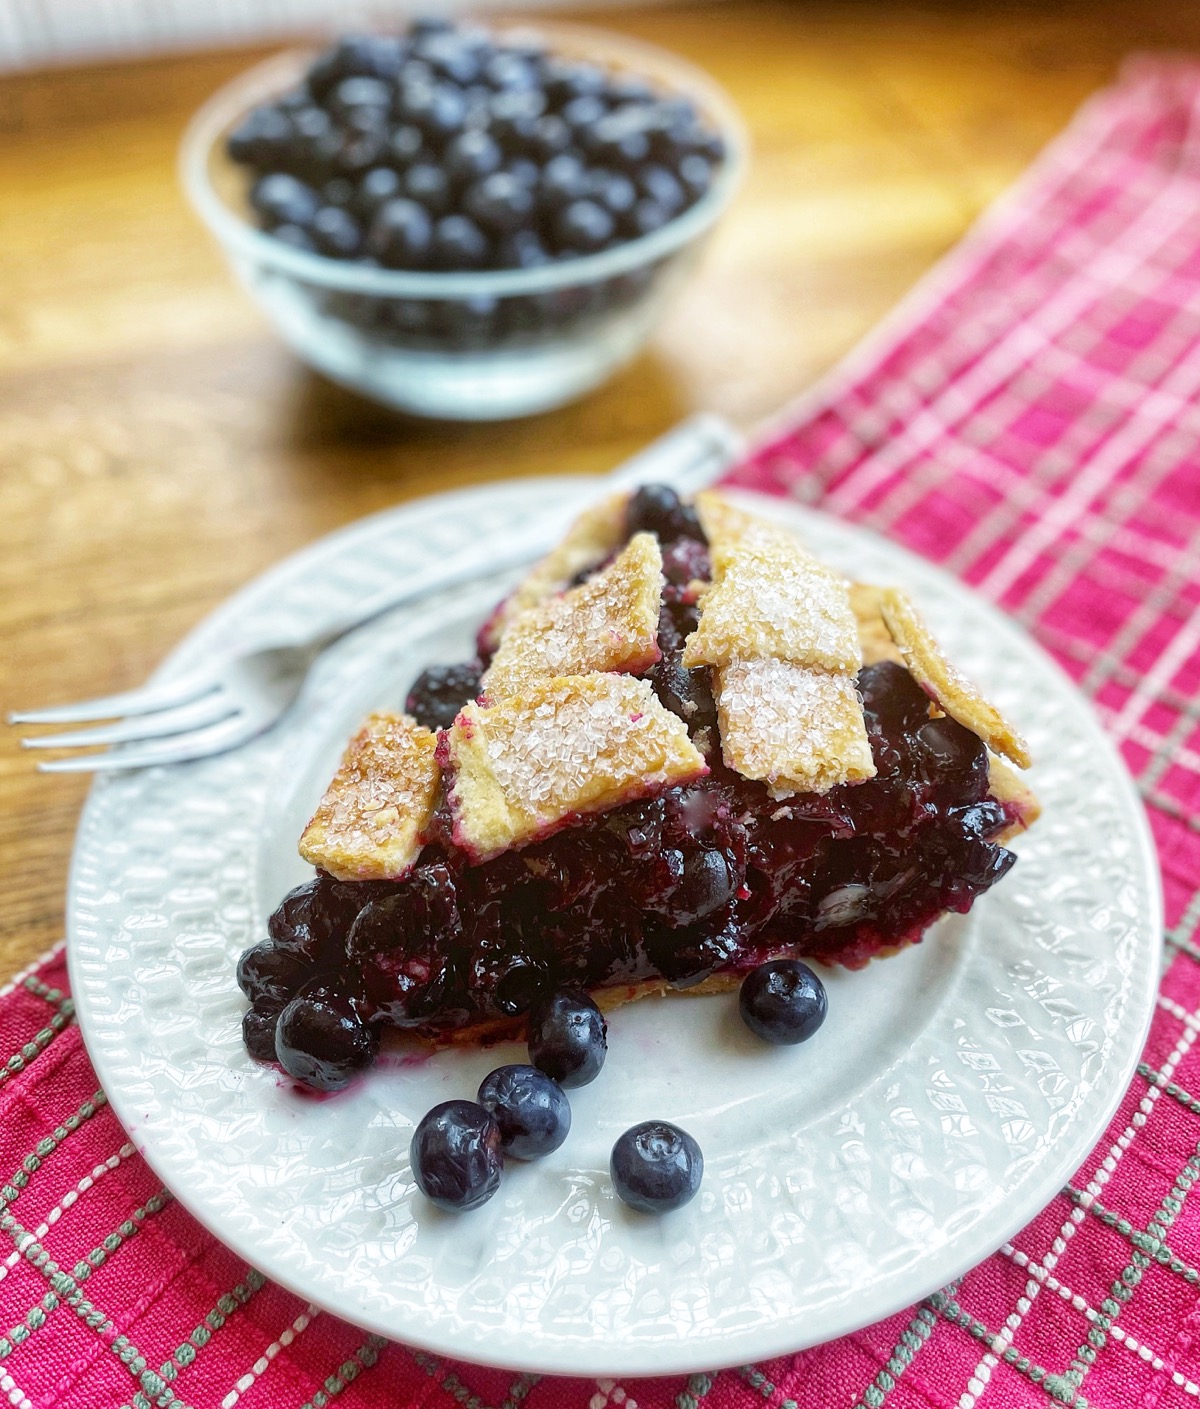 Slice of blueberry pie on a plate, bowl of blueberries in the background.